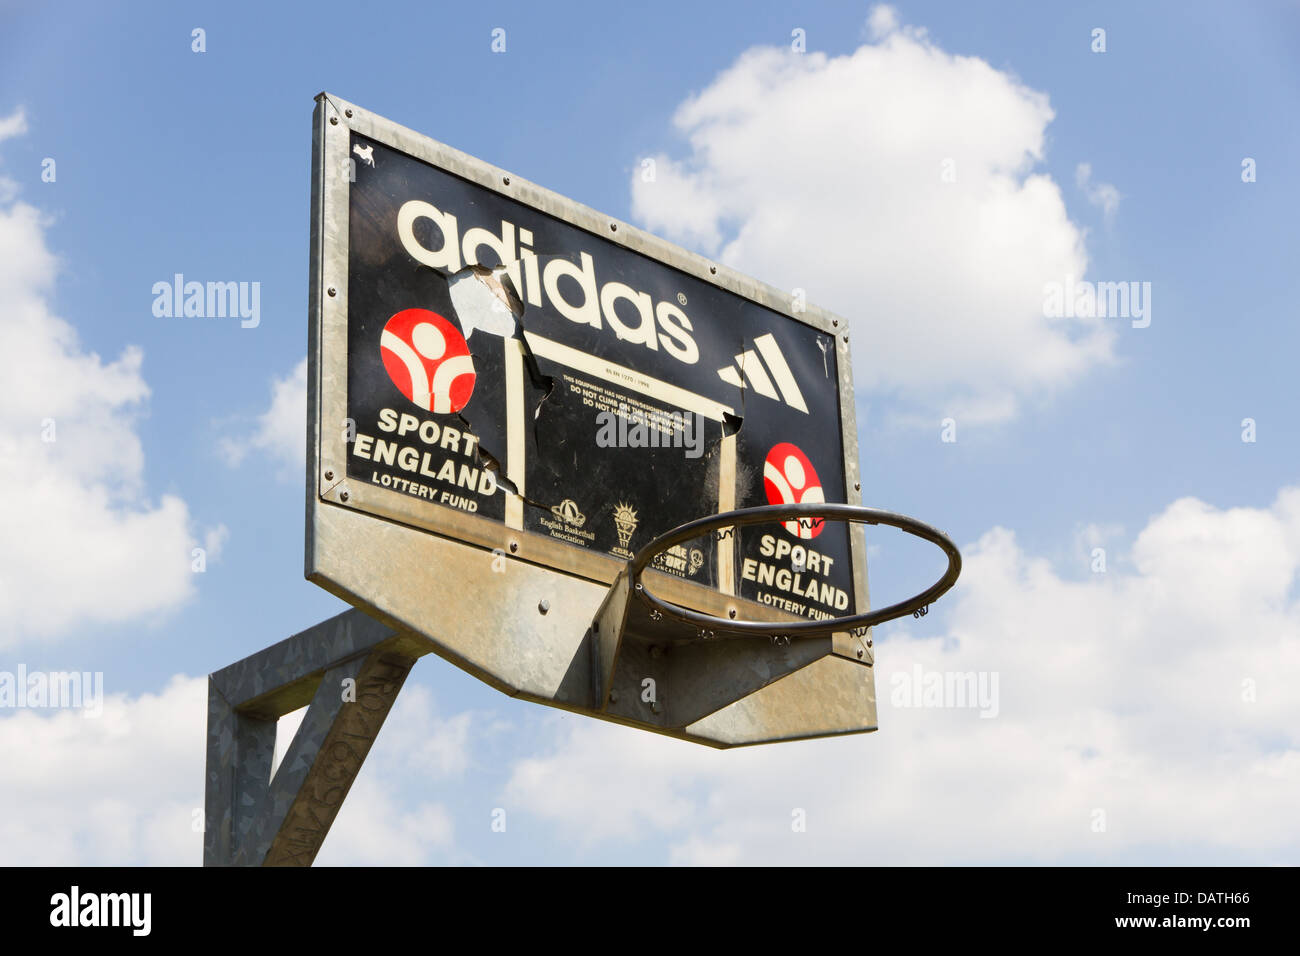 A well used Basketball net Stock Photo